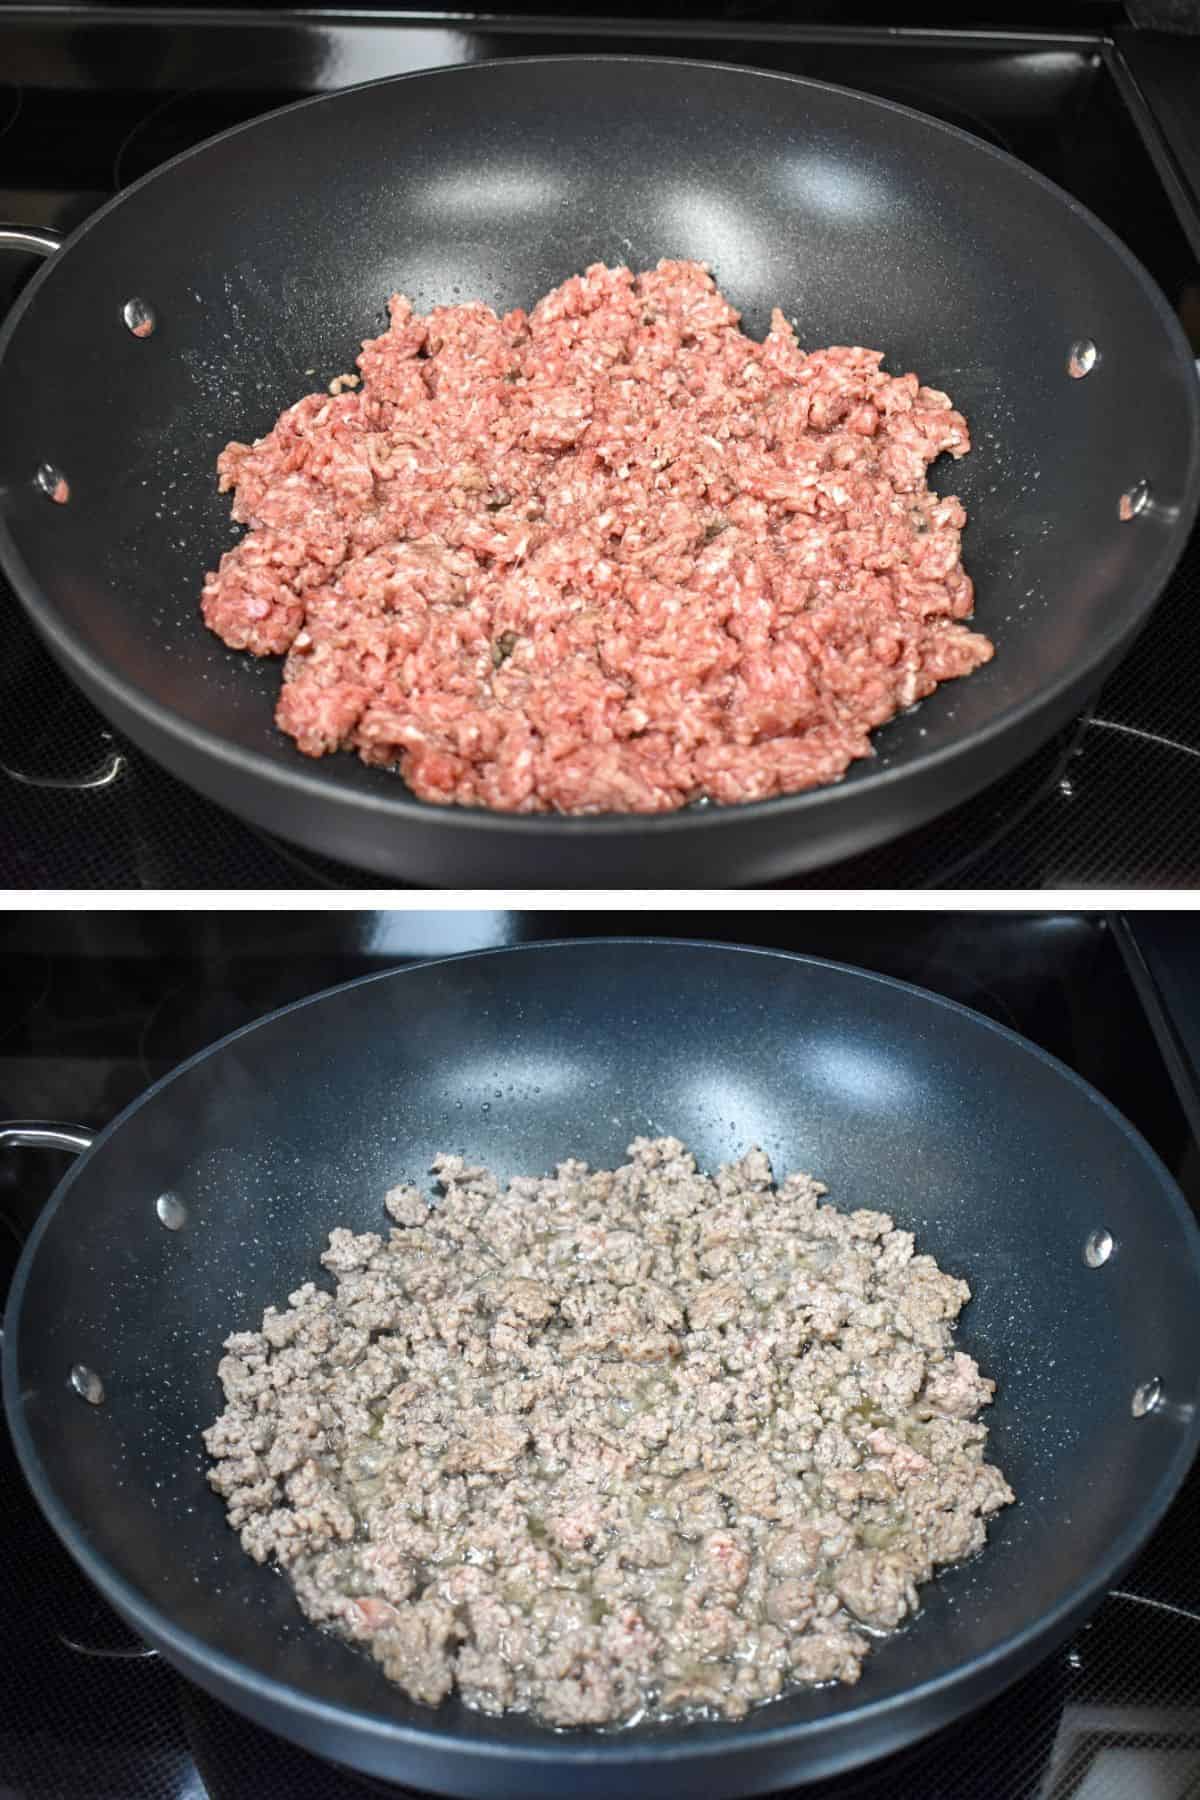 Two pictures of ground beef in a large, black skillet, in the first one it is raw and the second picture it is browned.